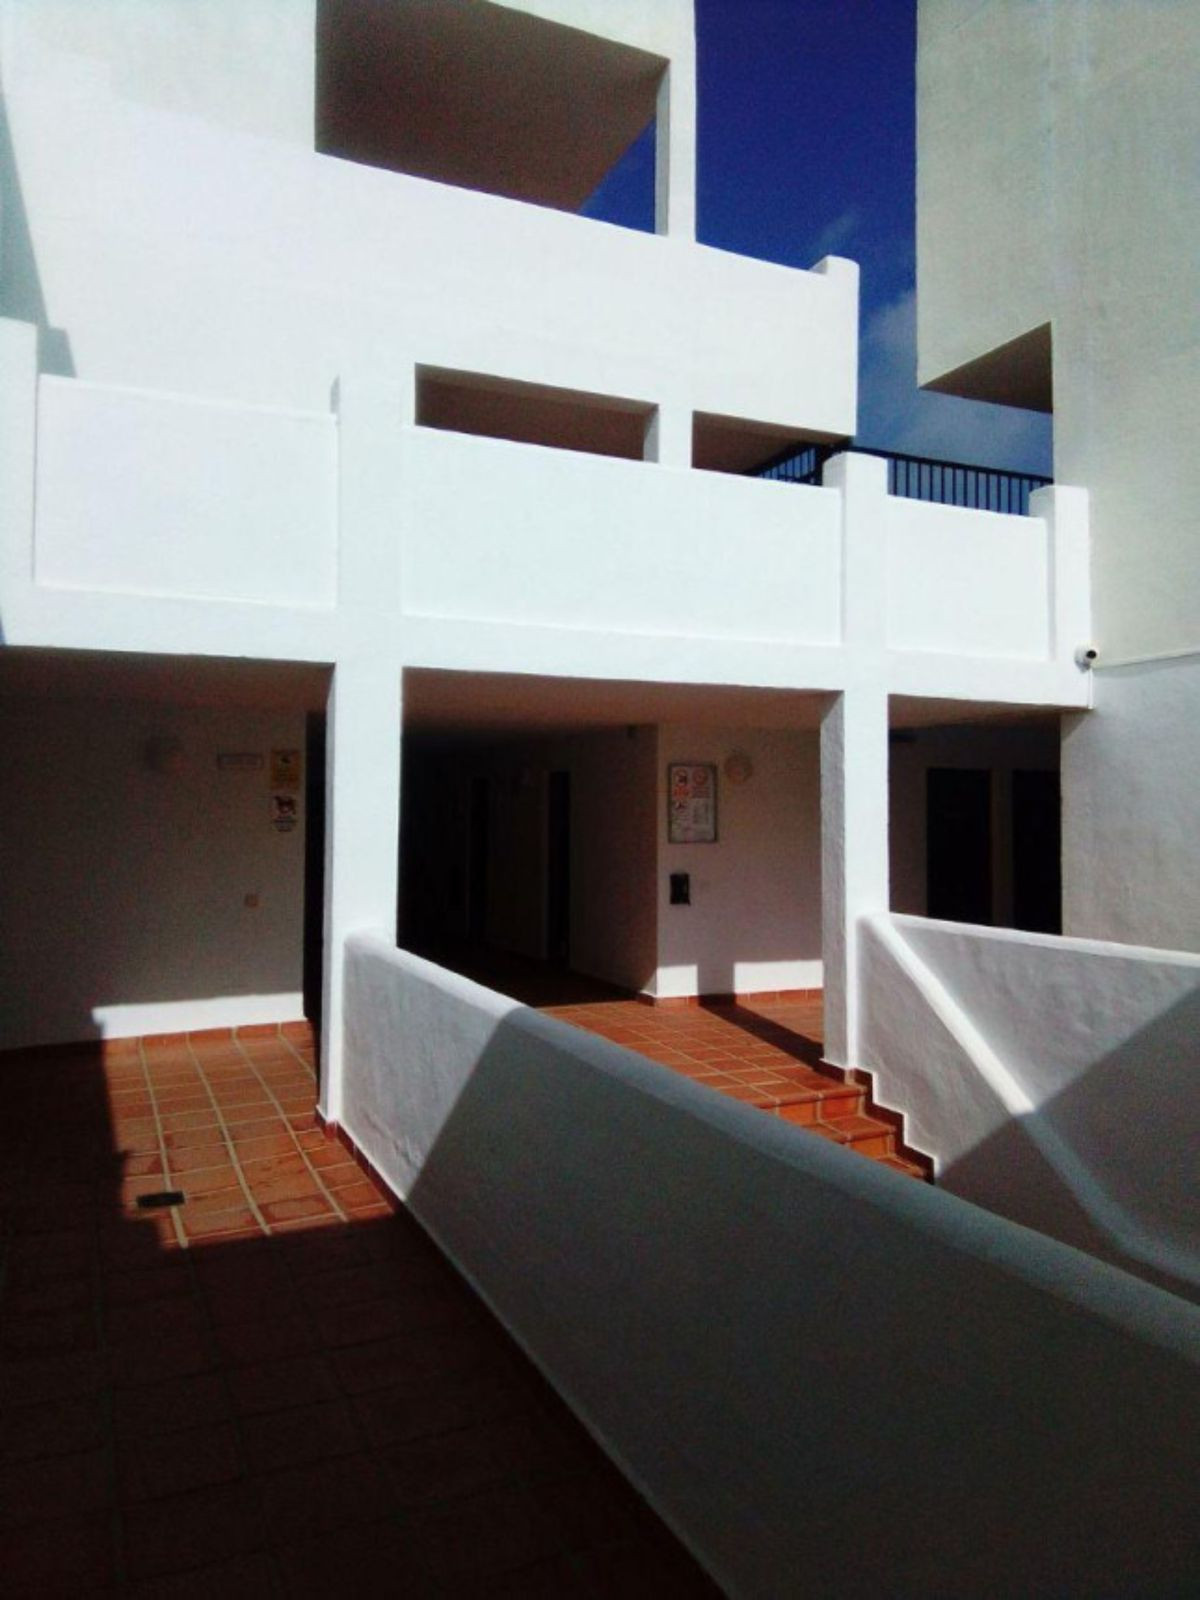 Apartment in Forest Hills with 2 bedrooms, 2bathrooms, living room, kitchen, marble, terrace 20 mete, Spain